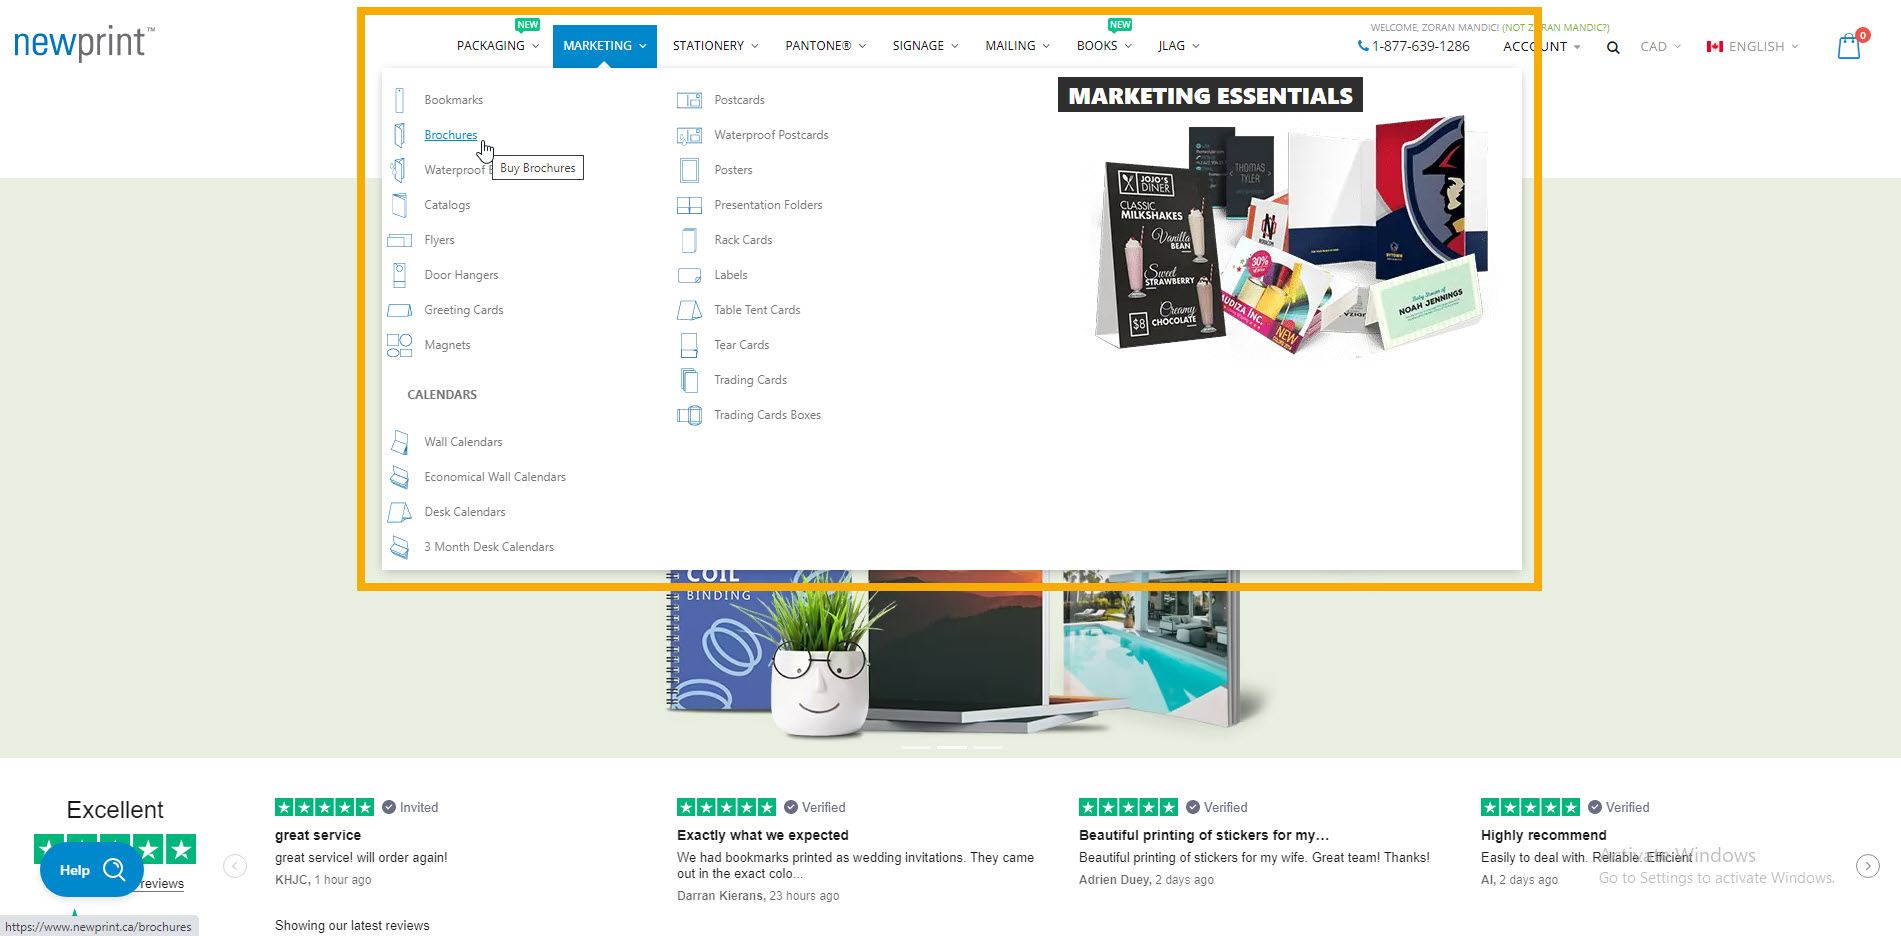 A screen shot of the main menu on Newprint's website showing where to choose a product in order to download a print template.